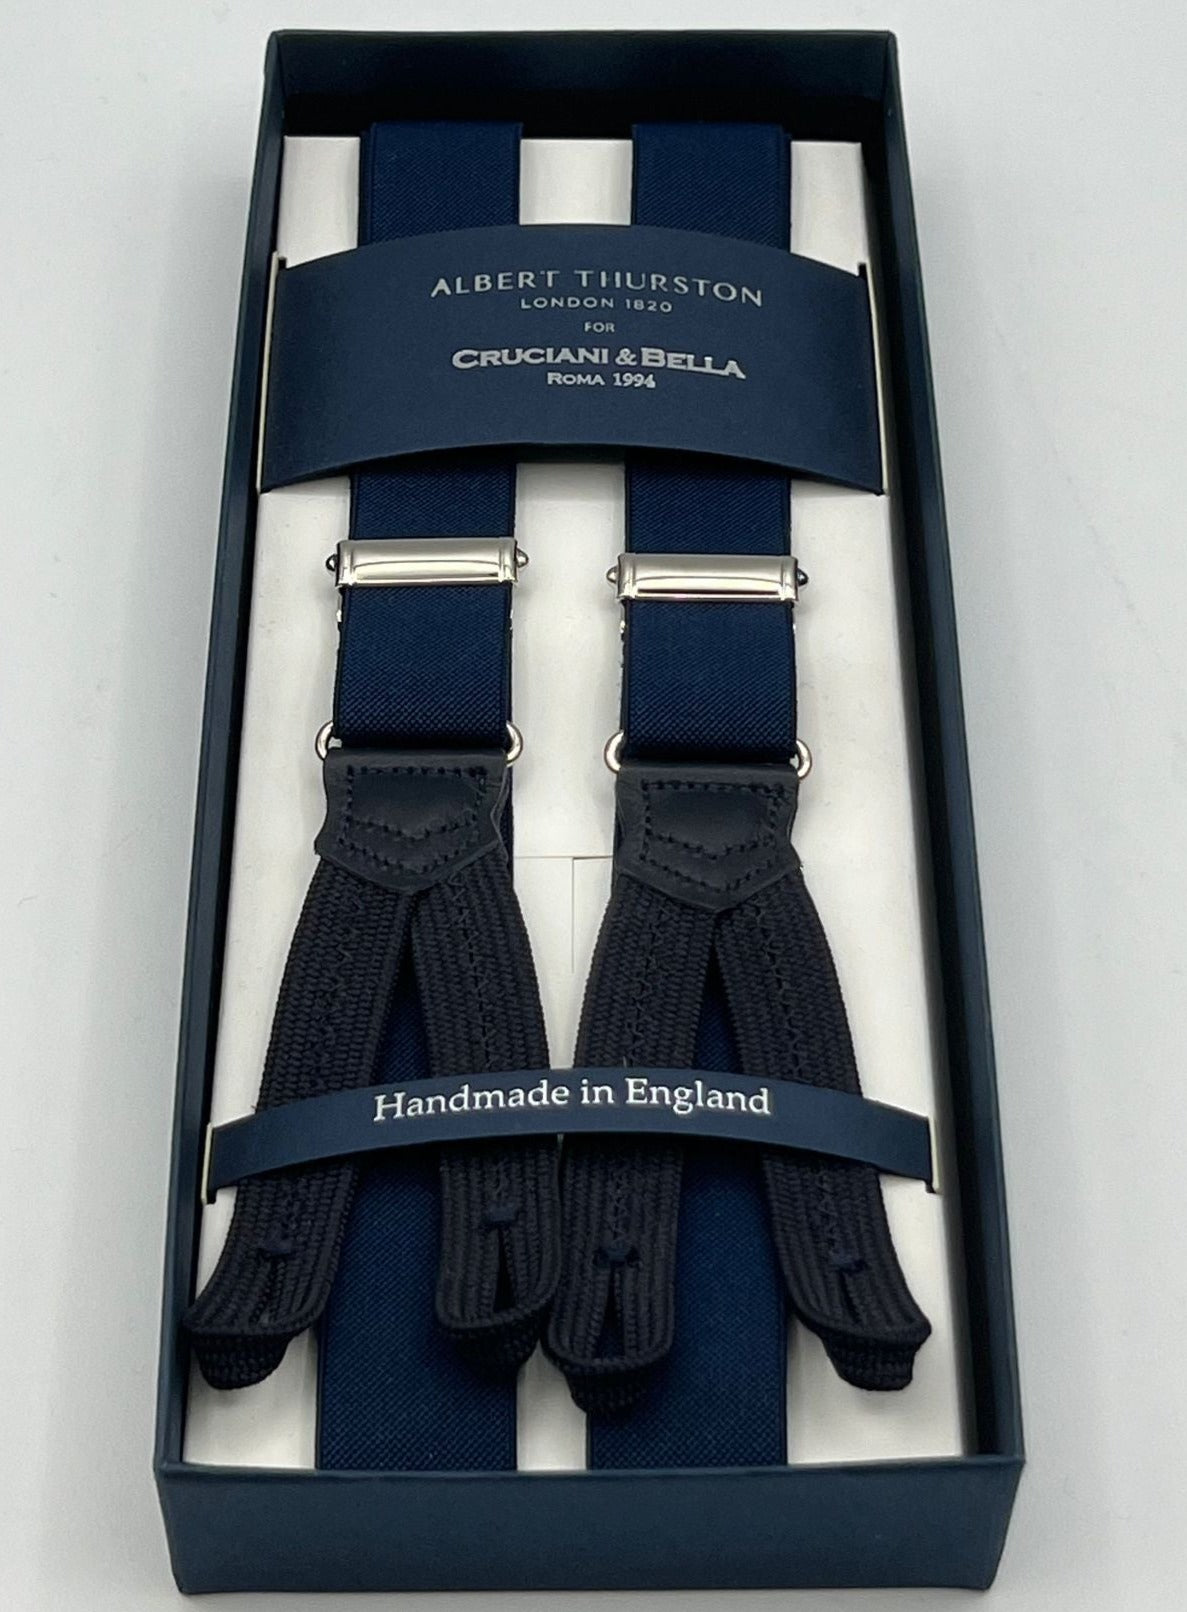 Albert Thurston for Cruciani & Bella Made in England Adjustable Sizing 25 mm elastic braces Blue Plain Braid ends Y-Shaped Nickel Fittings Size: XL